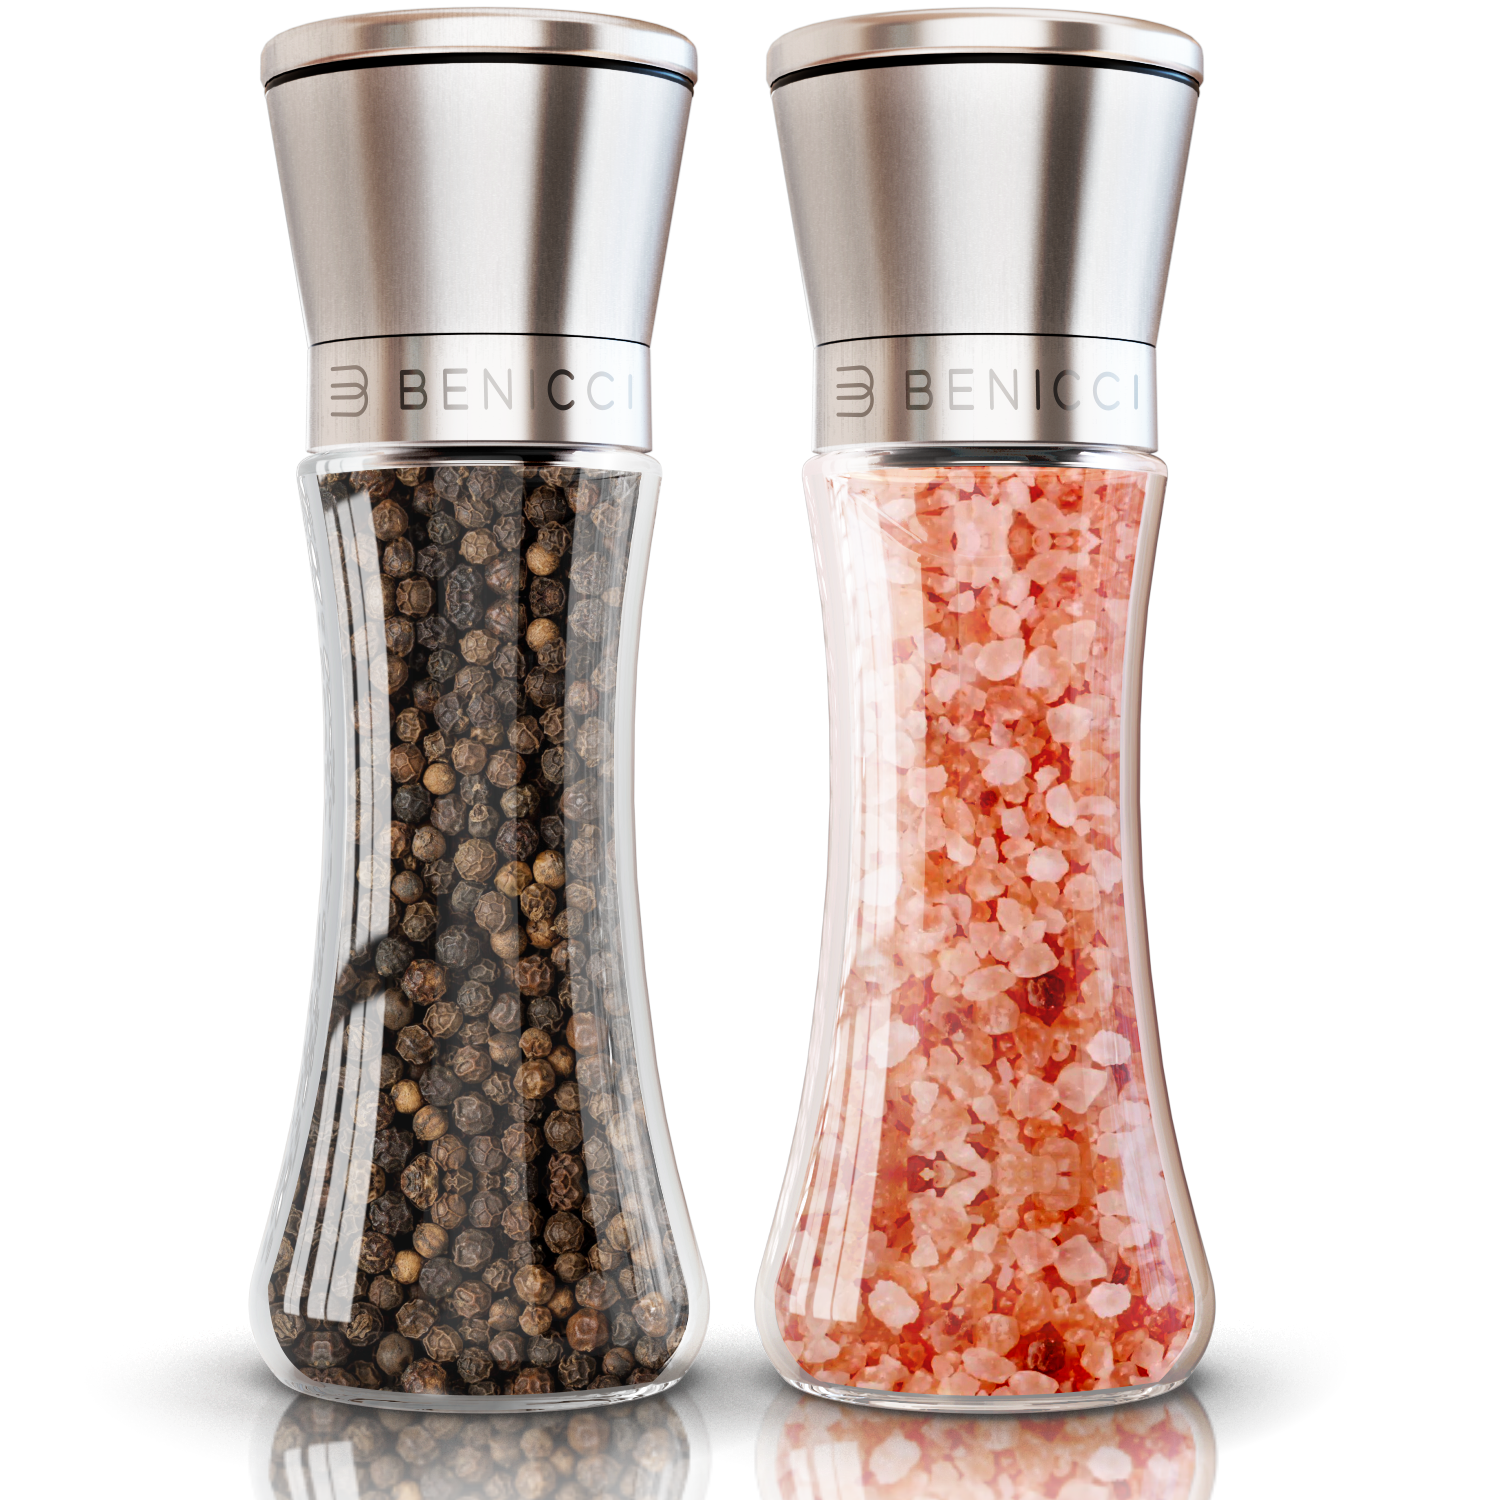 Benicci Premium Salt and Pepper Grinder Set of 2 - Two Refillable, Stainless Steel Sea & Spice Shakers with Adjustable Coarse Mills Easy Clean Ceramic